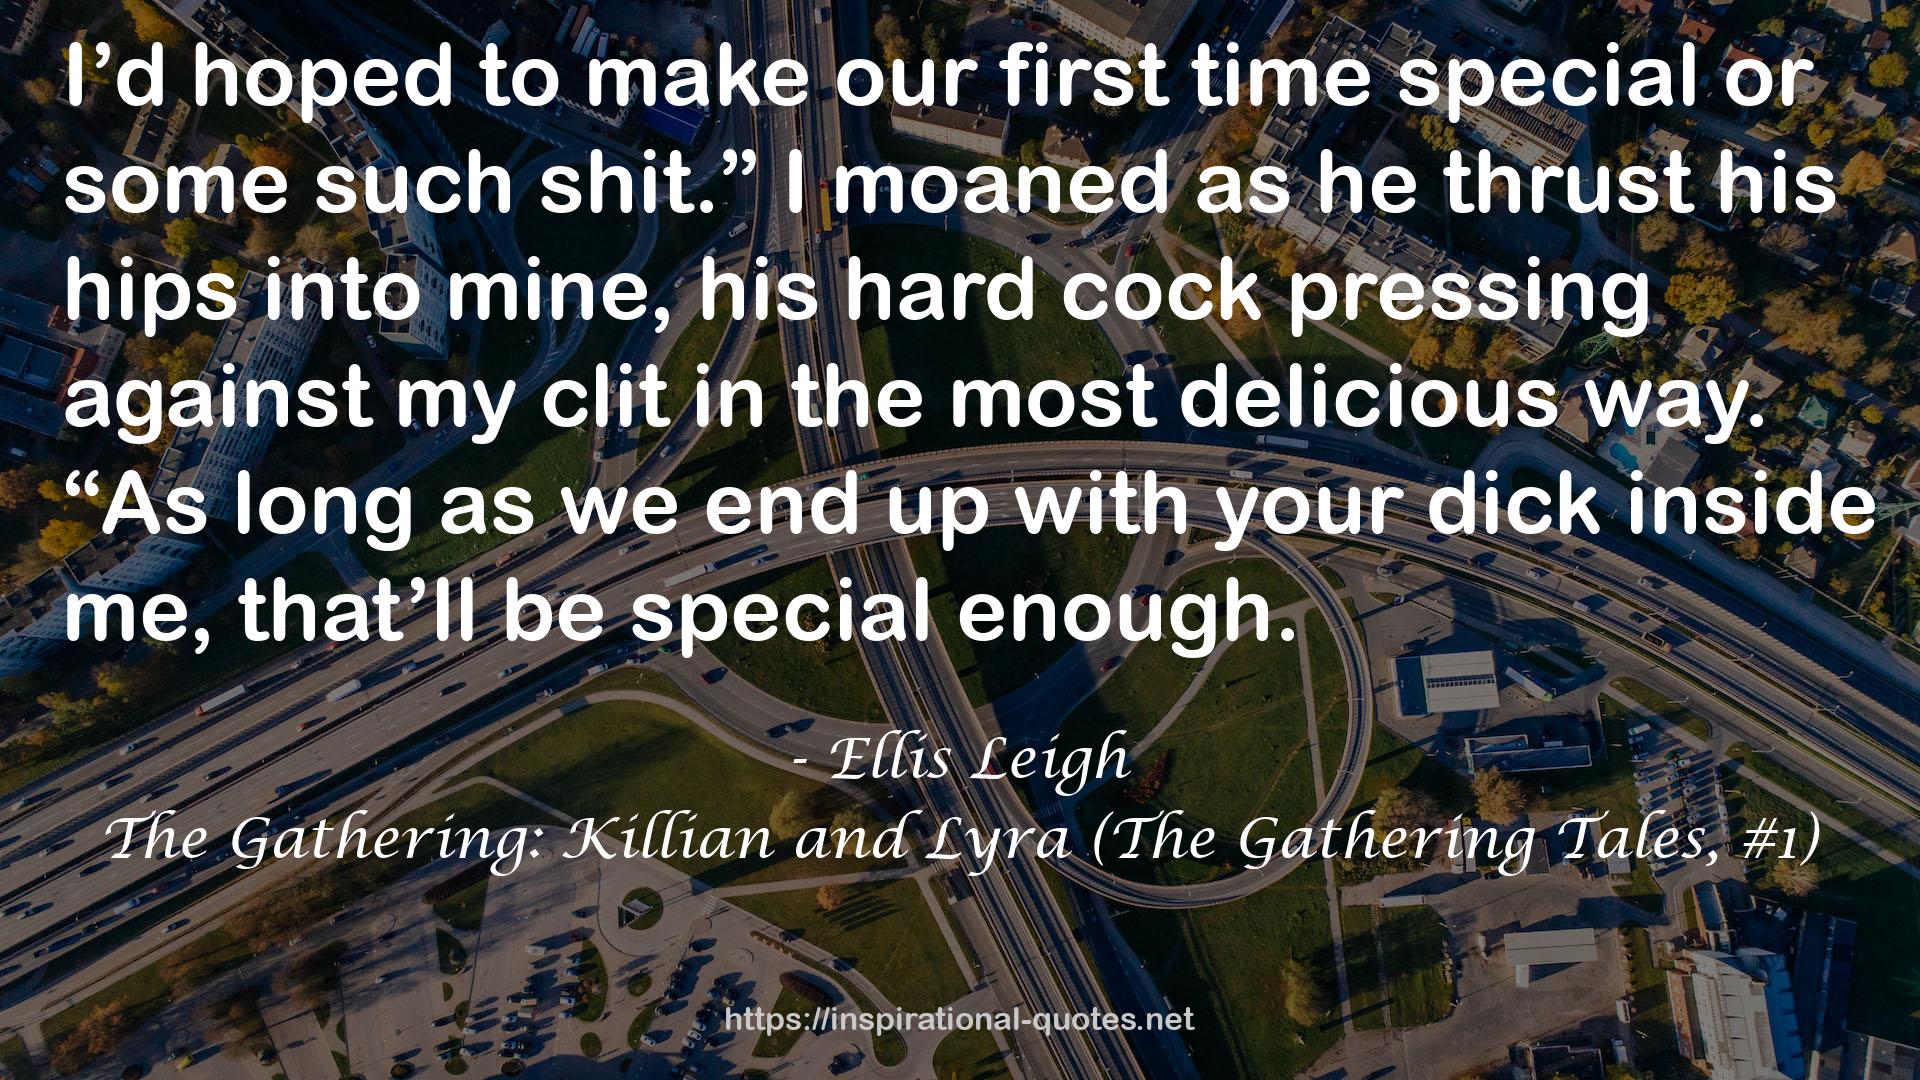 The Gathering: Killian and Lyra (The Gathering Tales, #1) QUOTES